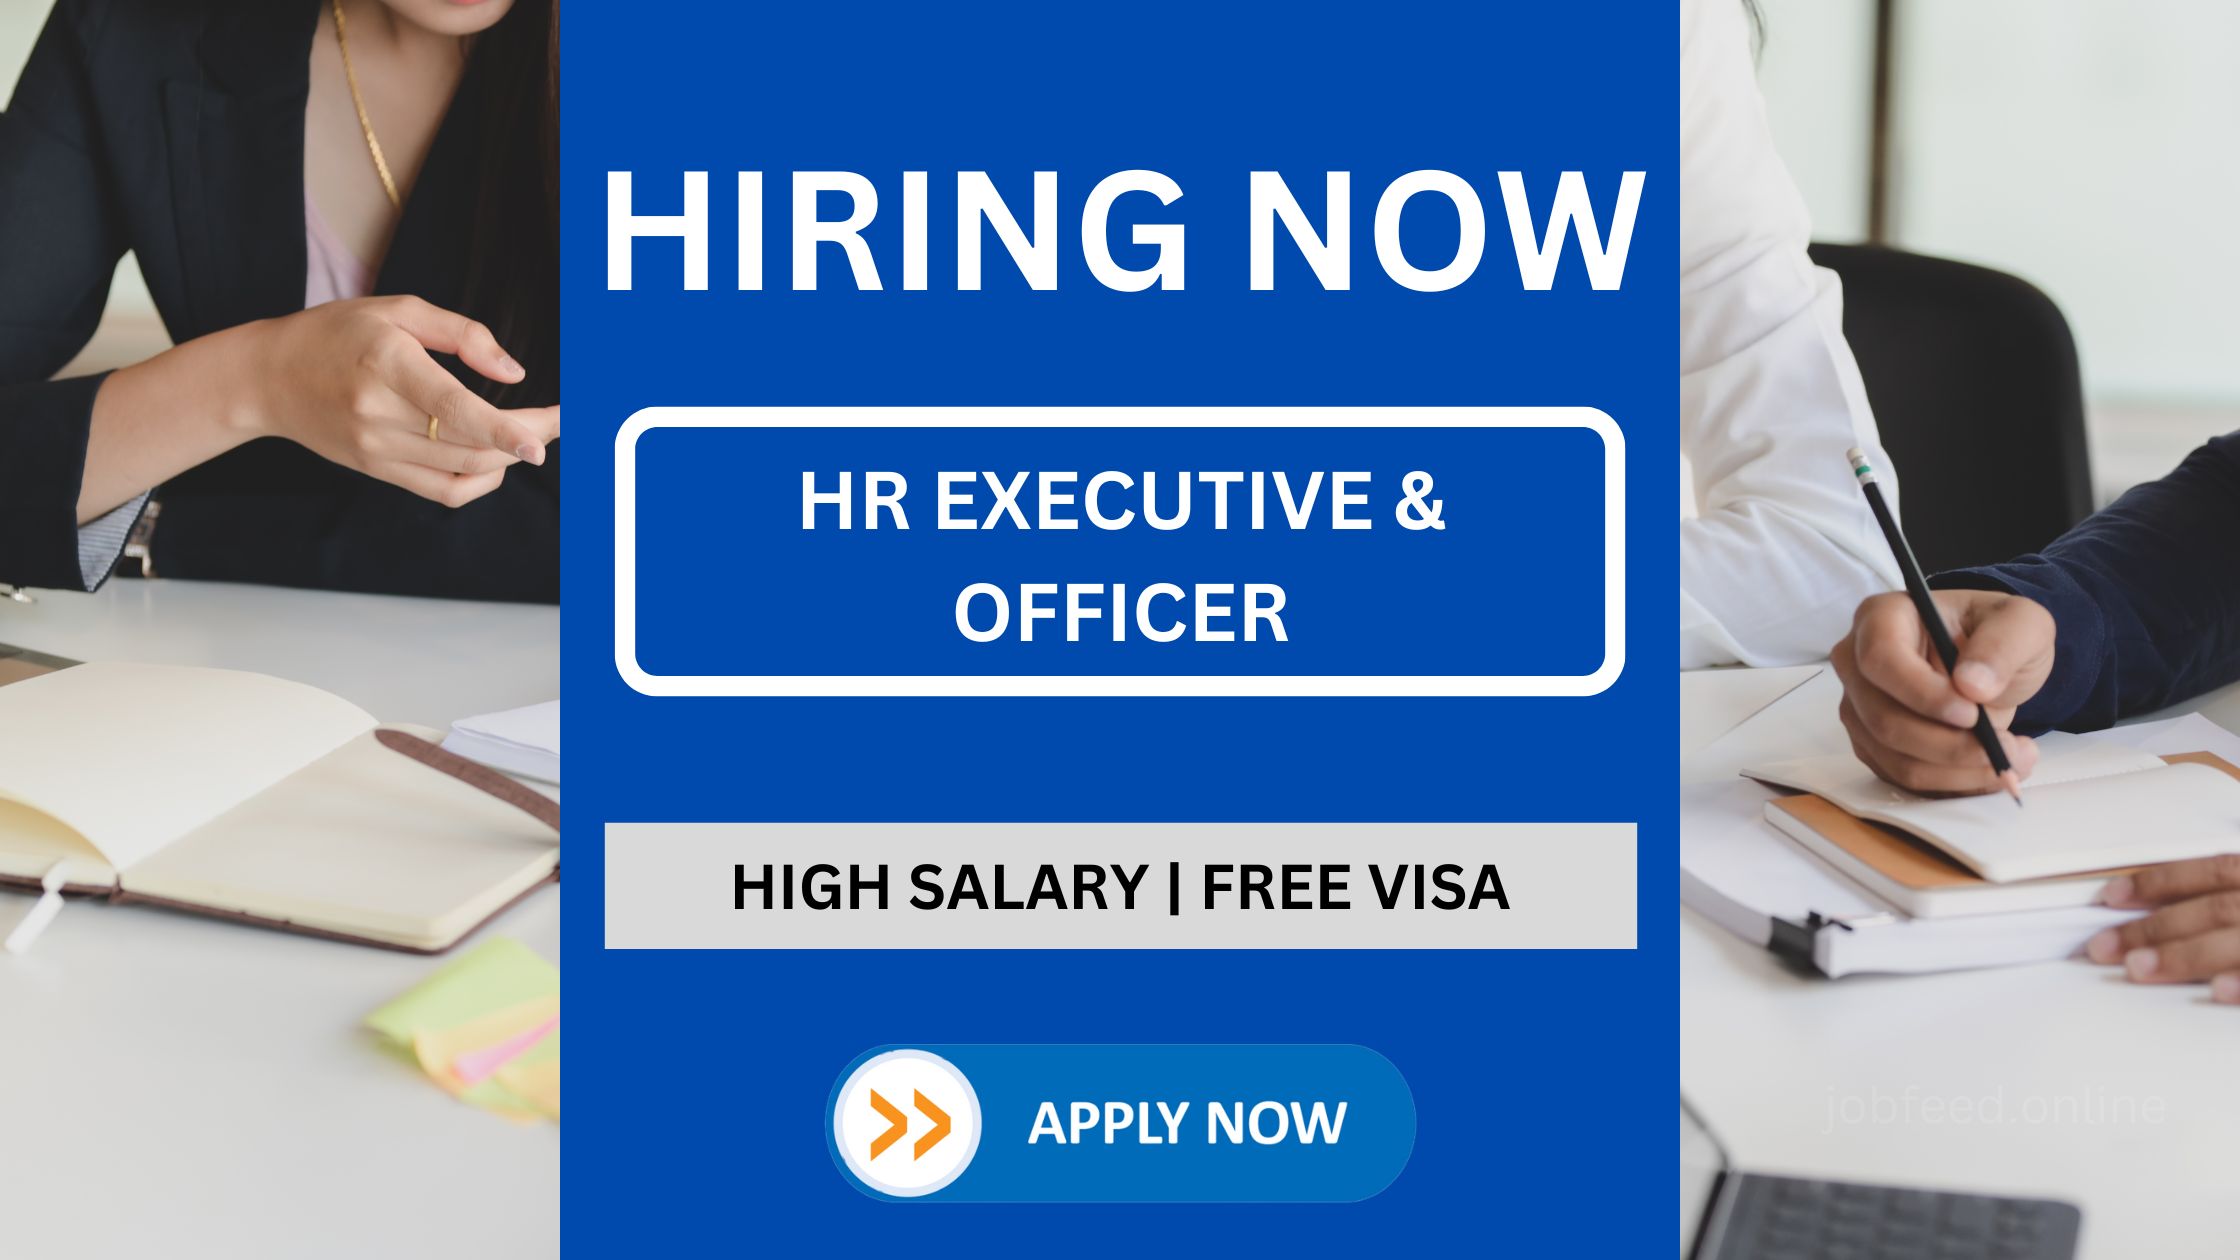 HR Executive & Officer: ConTech UAE is Hiring